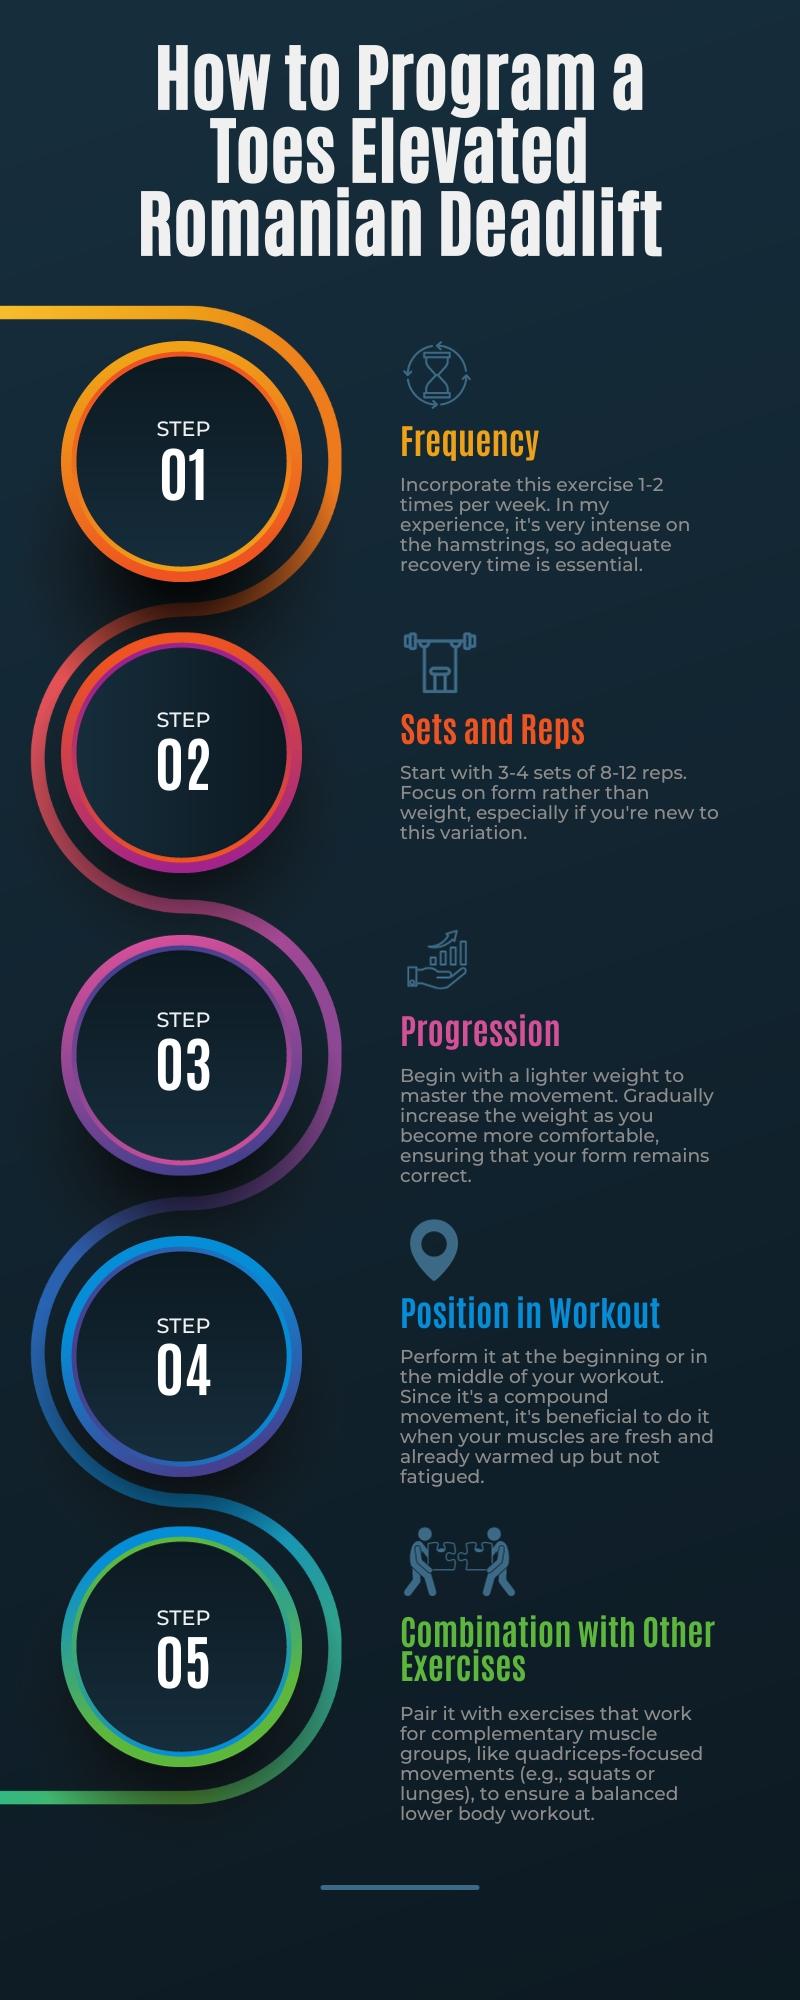 The infographic shows how to program a toes elevated Romanian deadlift. It includes setting the proper frequency, sets and reps, progression, position in a workout, and combination with other exercises.